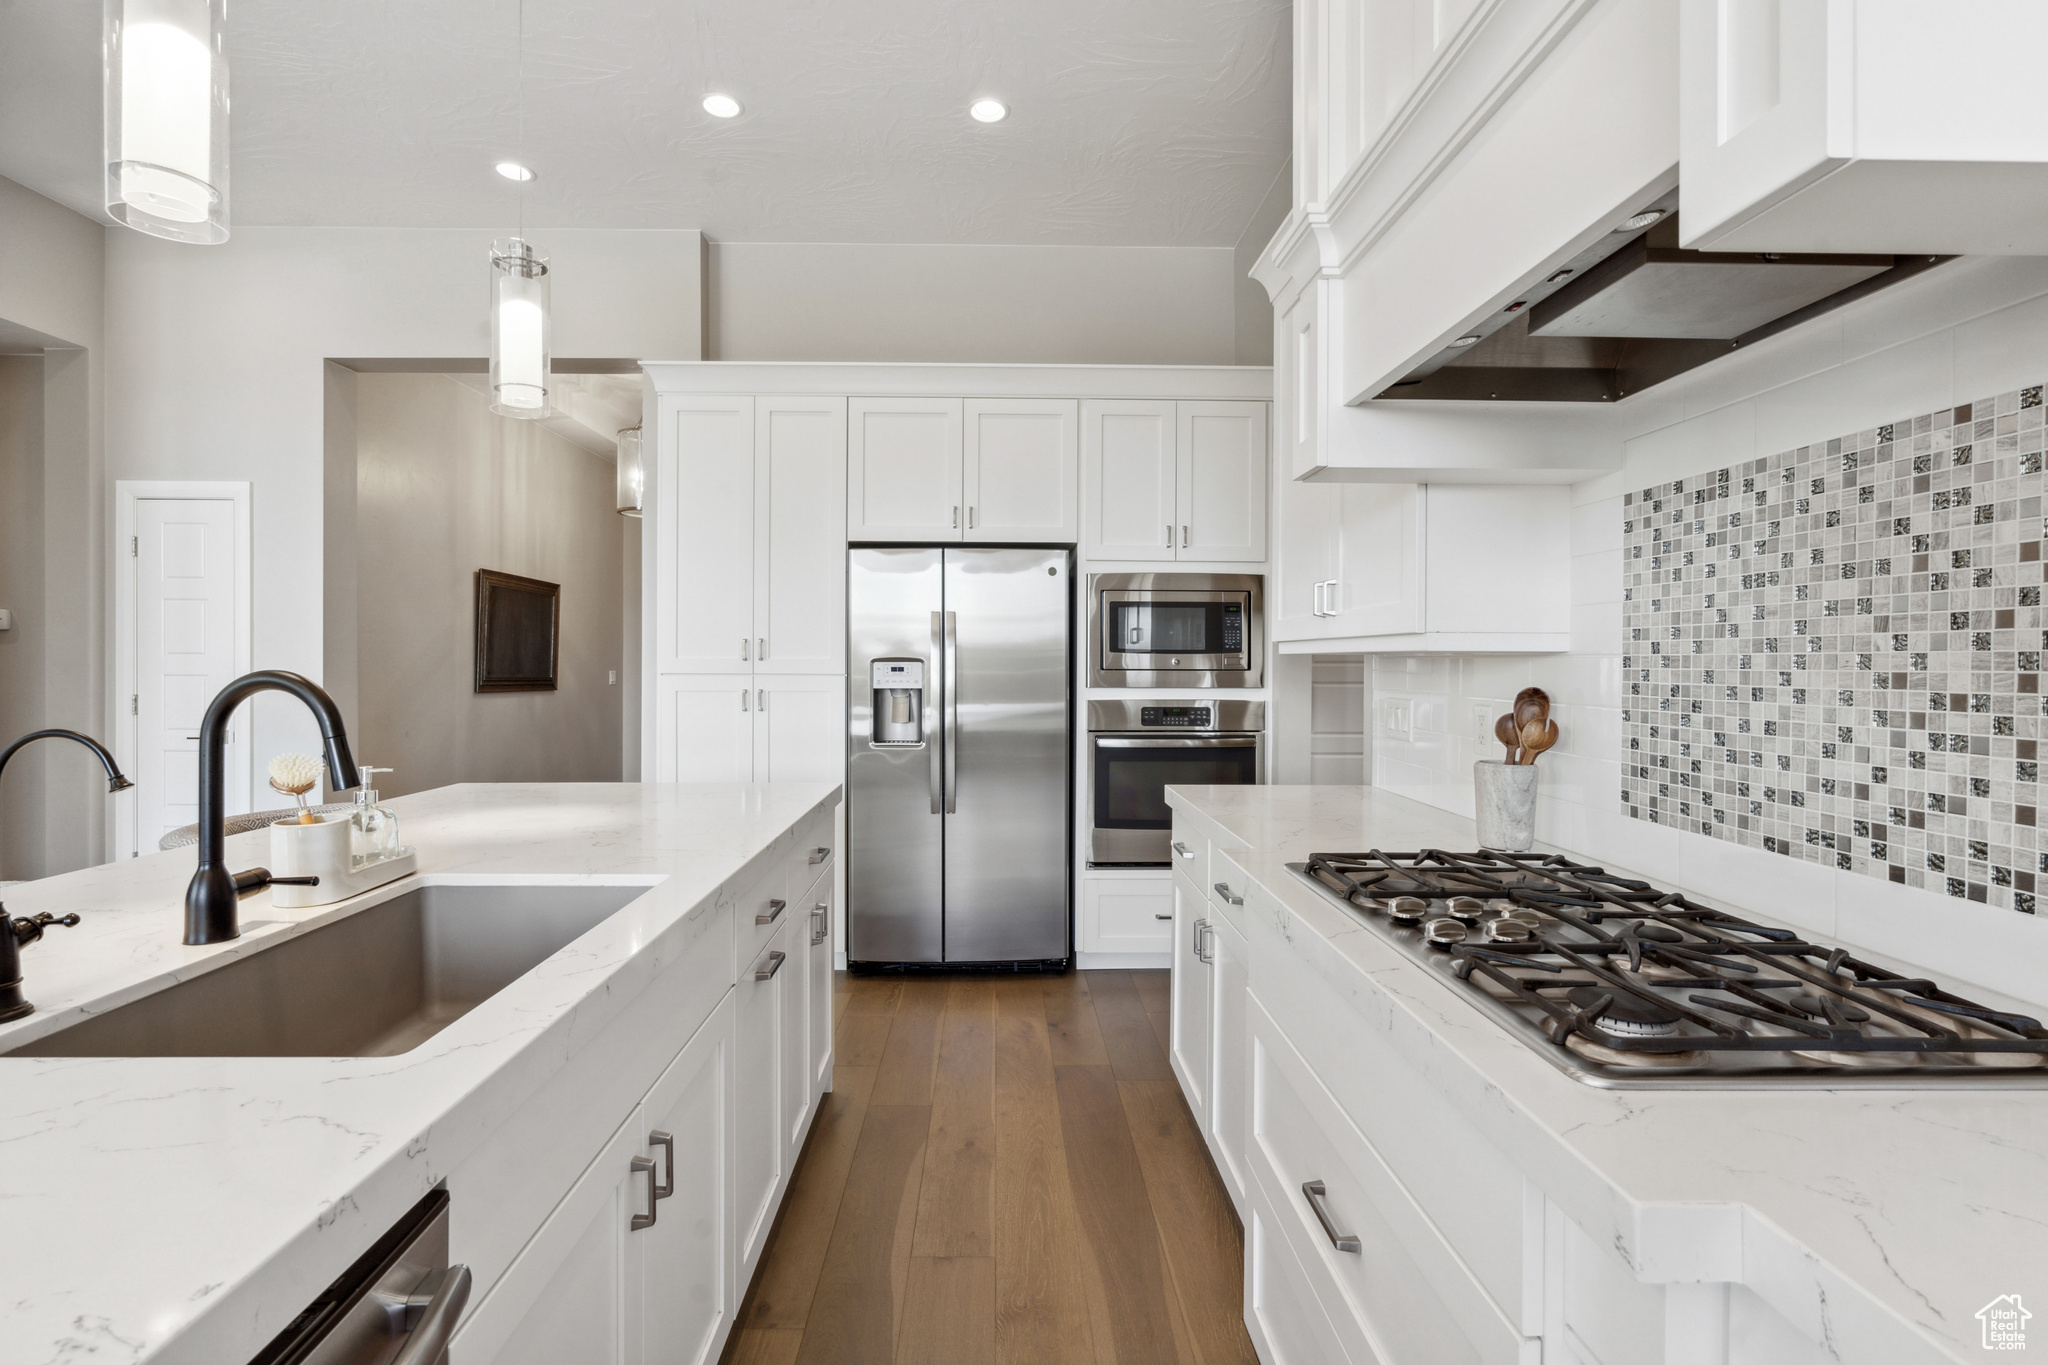 Kitchen with decorative light fixtures, dark hardwood / wood-style floors, appliances with stainless steel finishes, sink, and tasteful backsplash